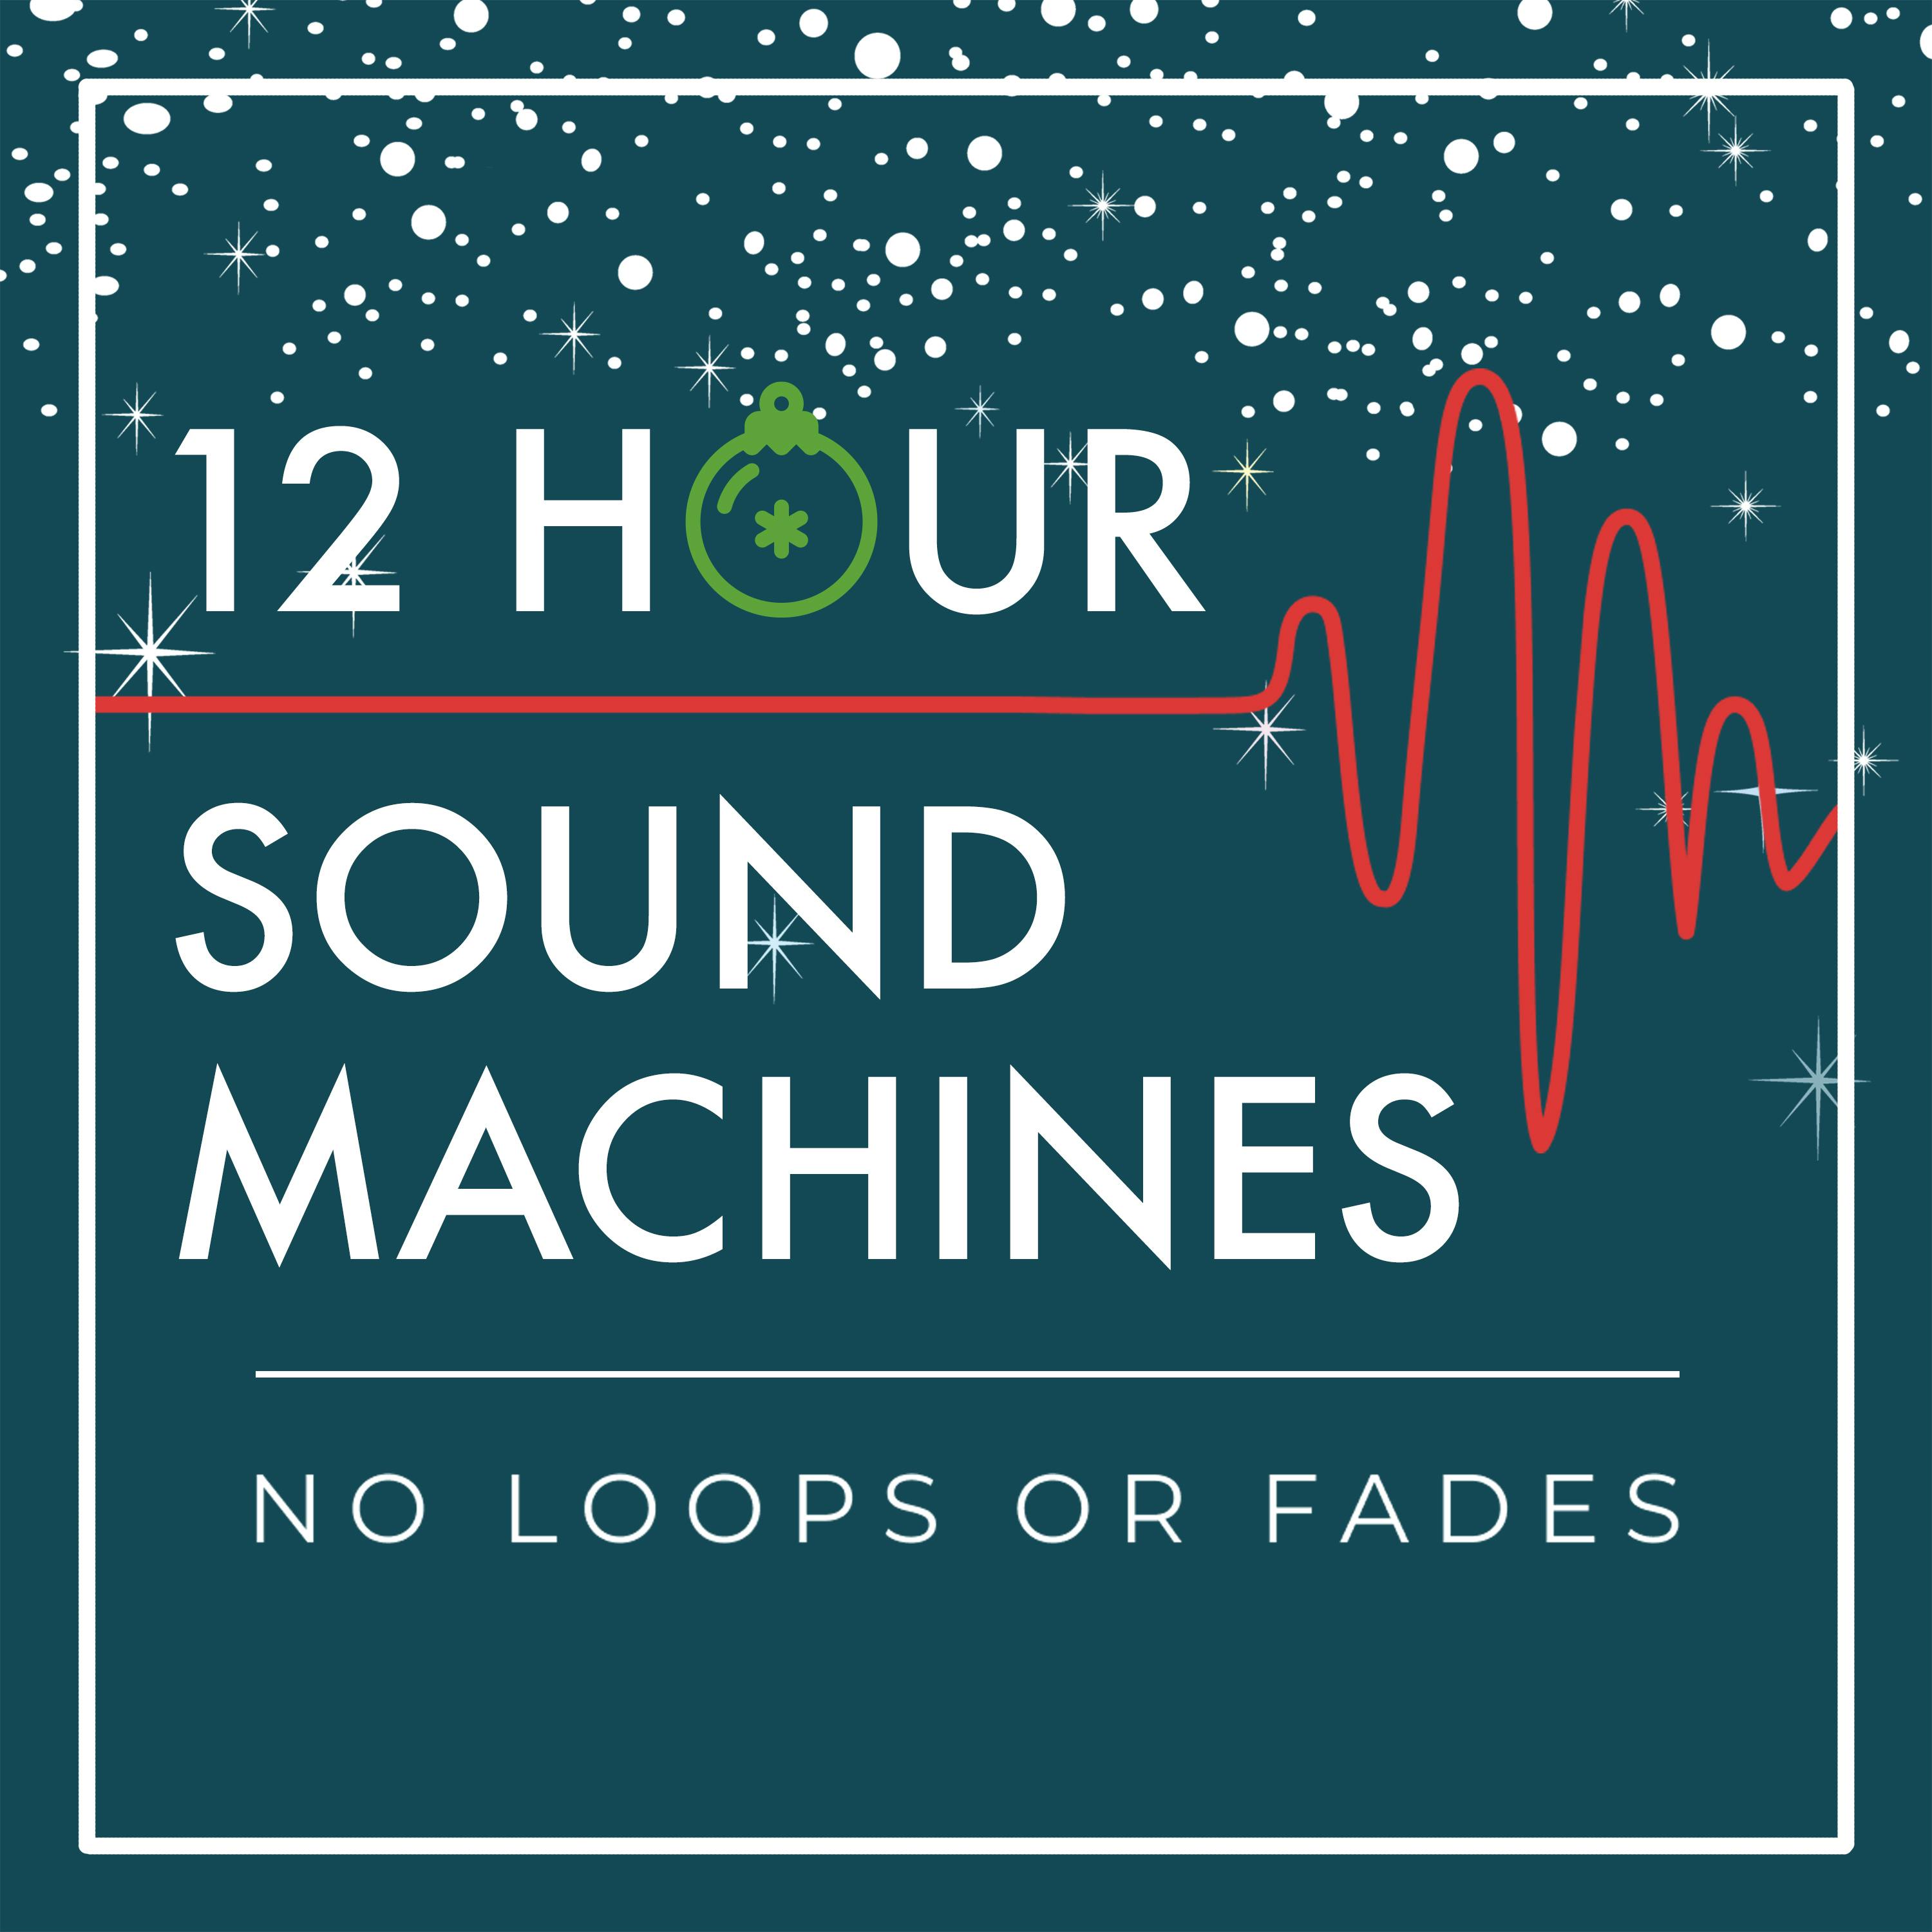 Christmas Village Sound Machine (12 Hours) - Soundscapes for the Holidays